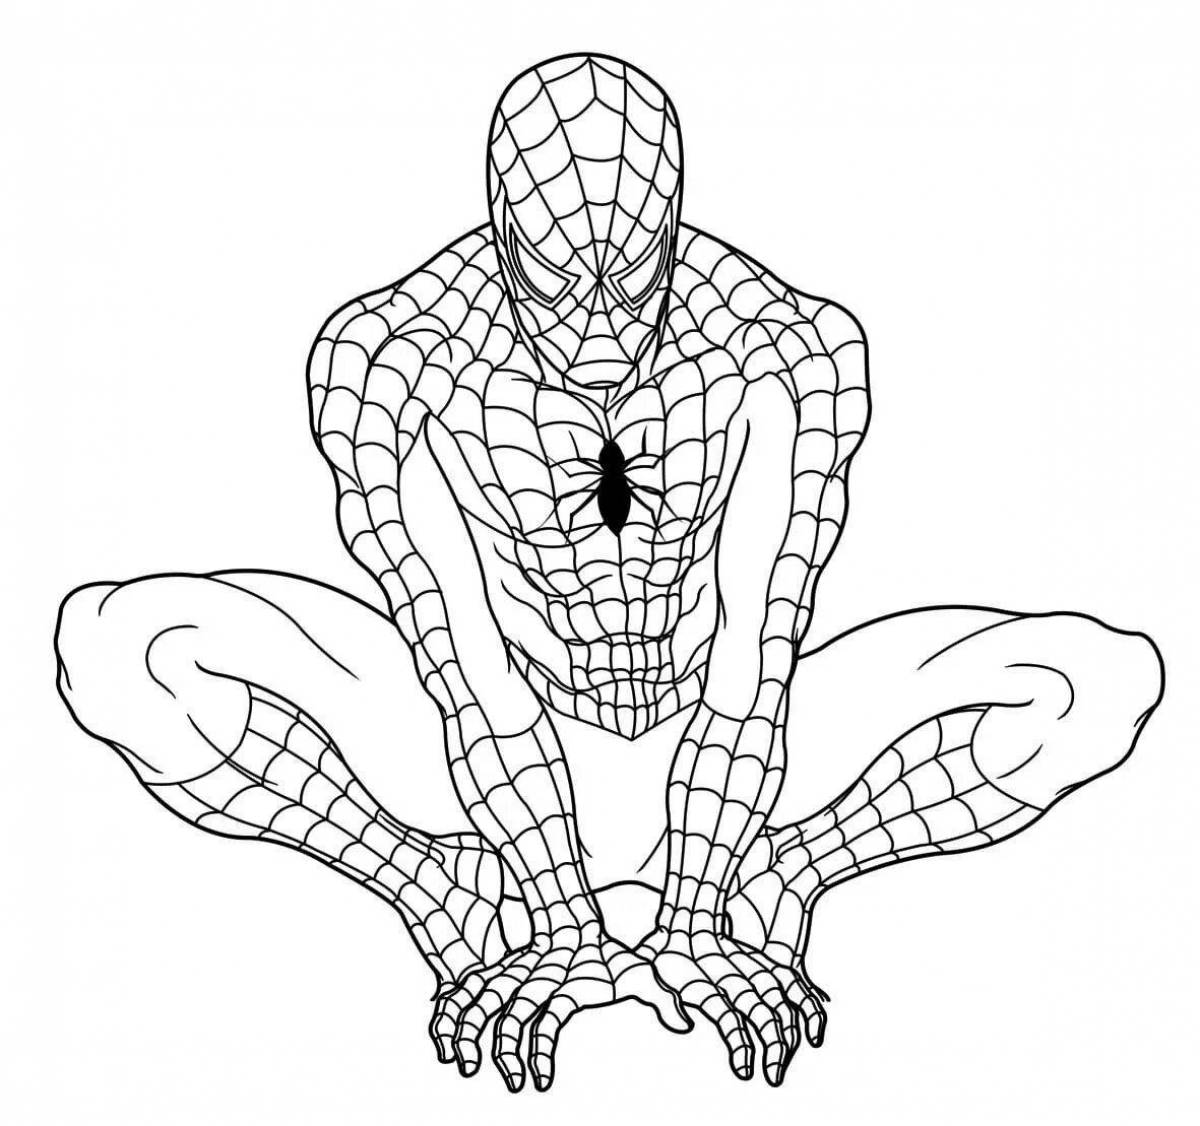 Artistically detailed spiderman coloring page